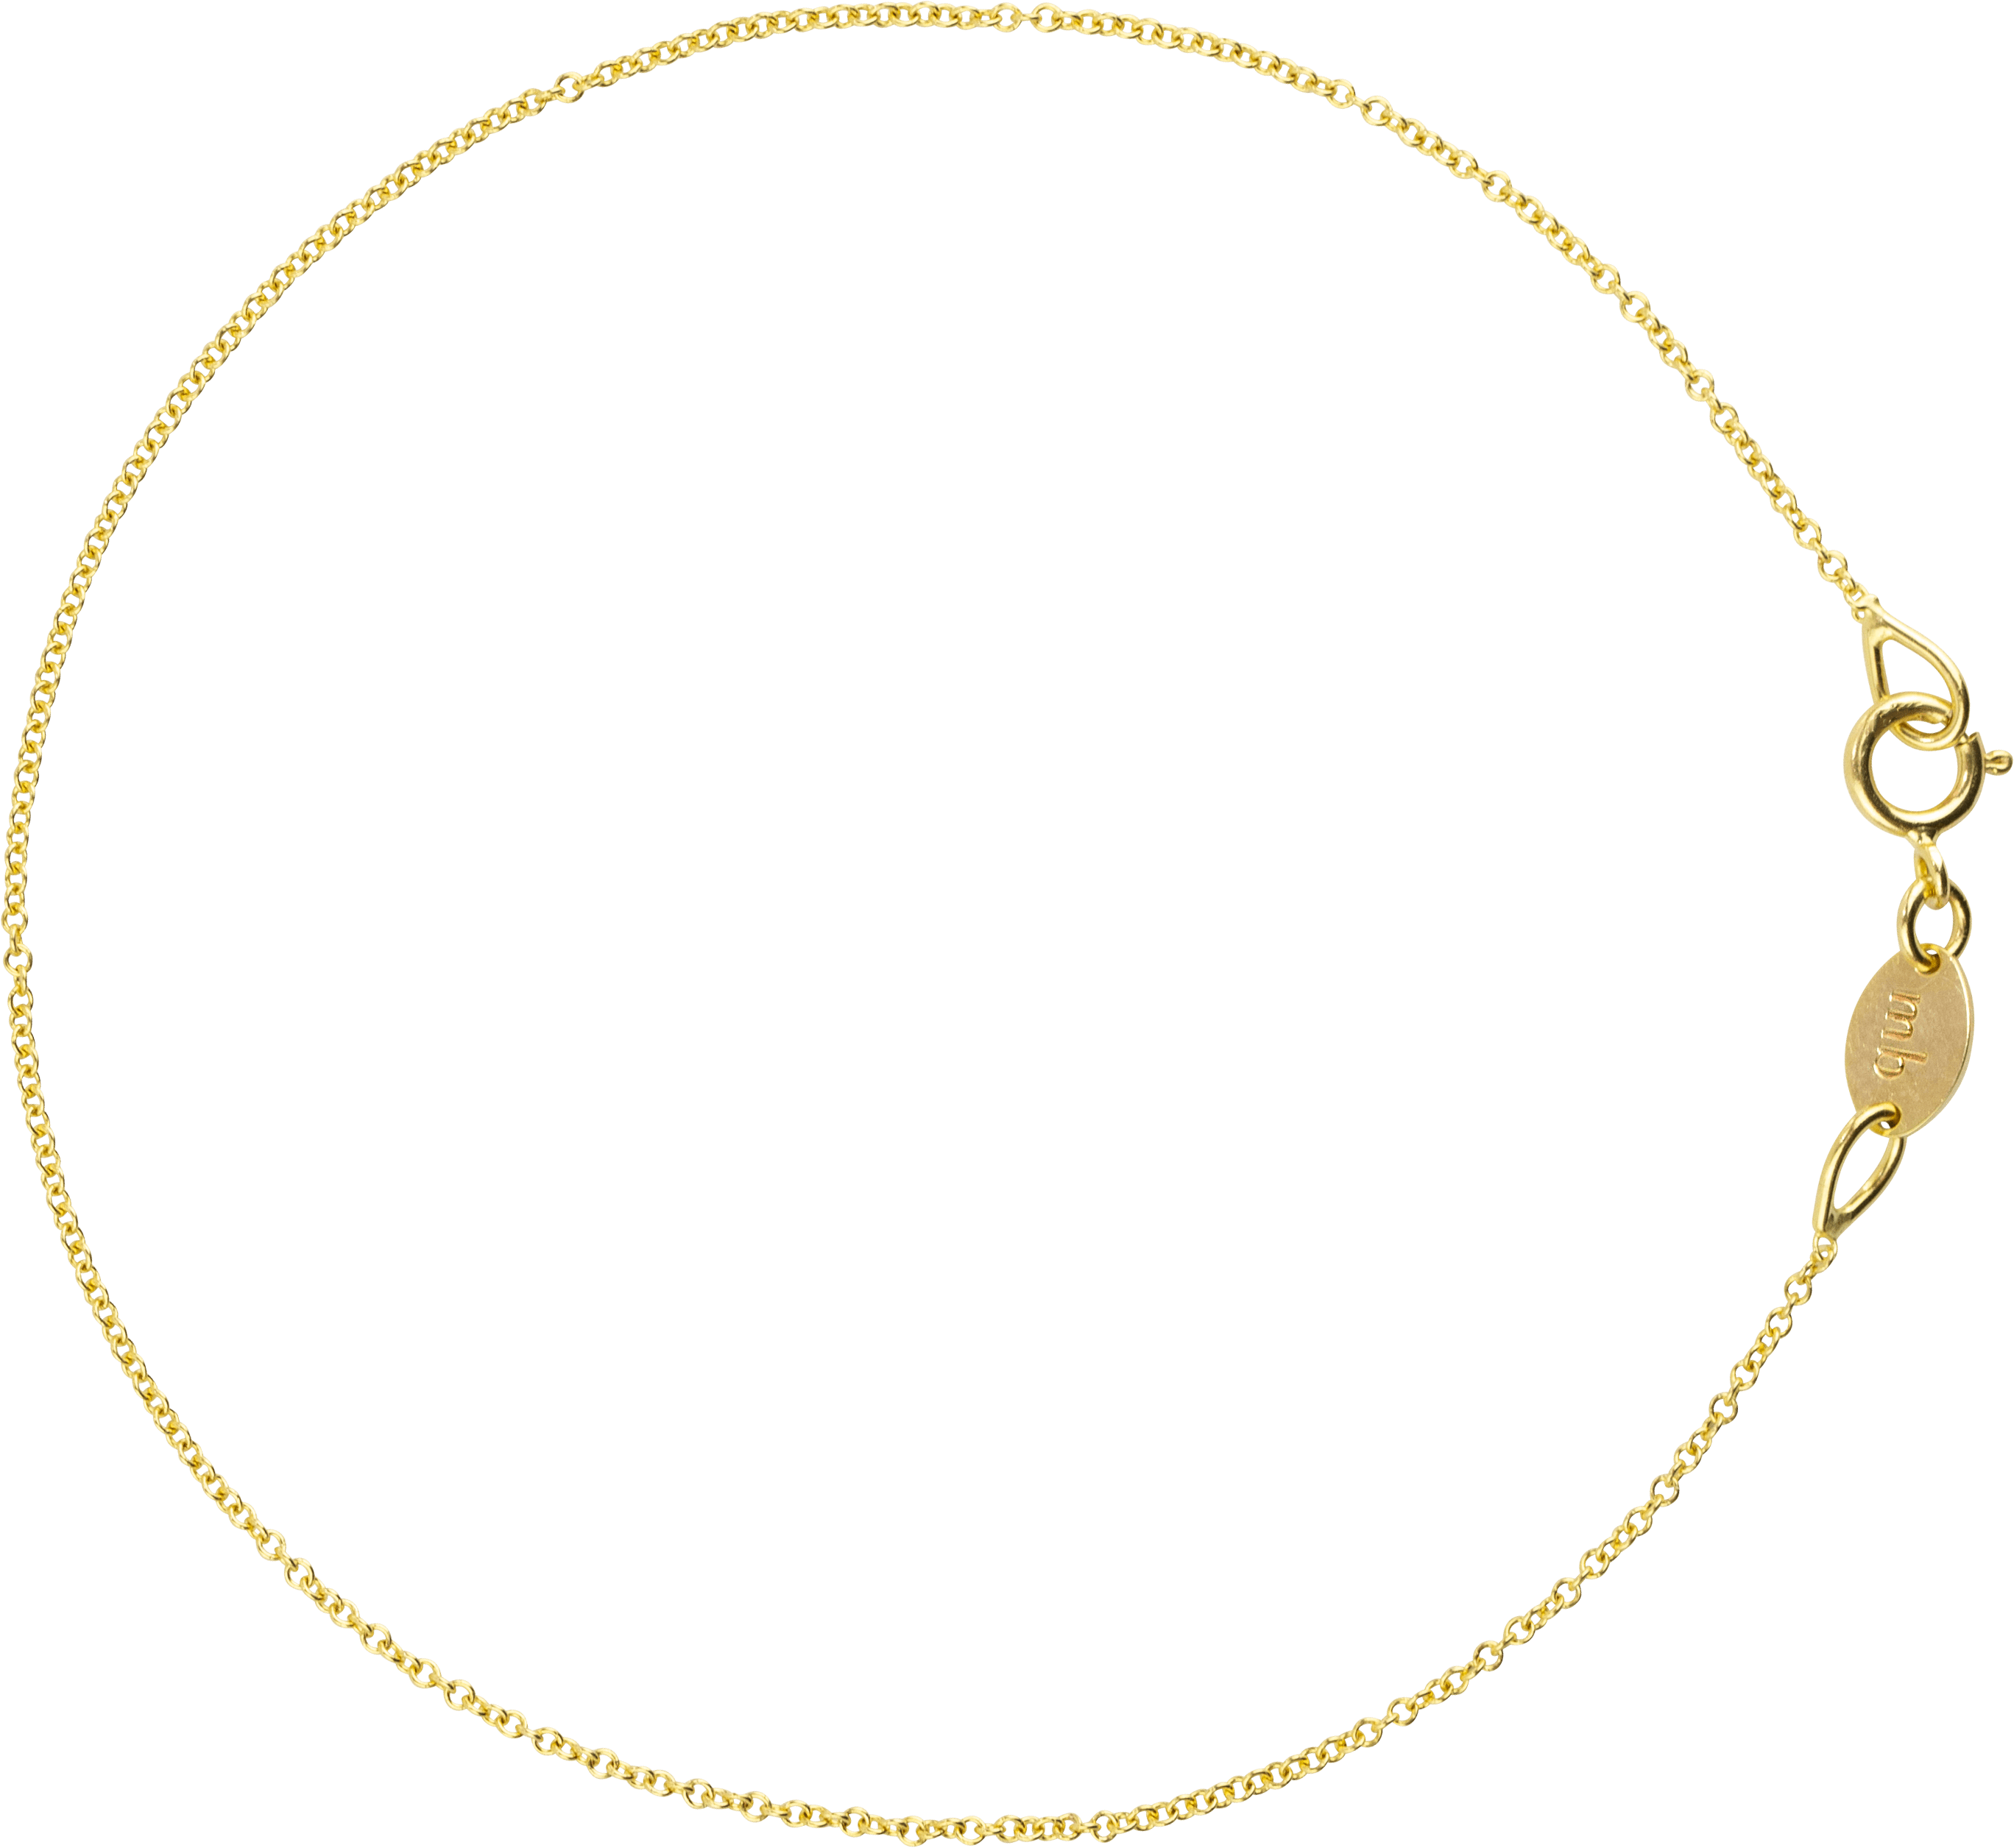 Elegant Gold Chain Isolated